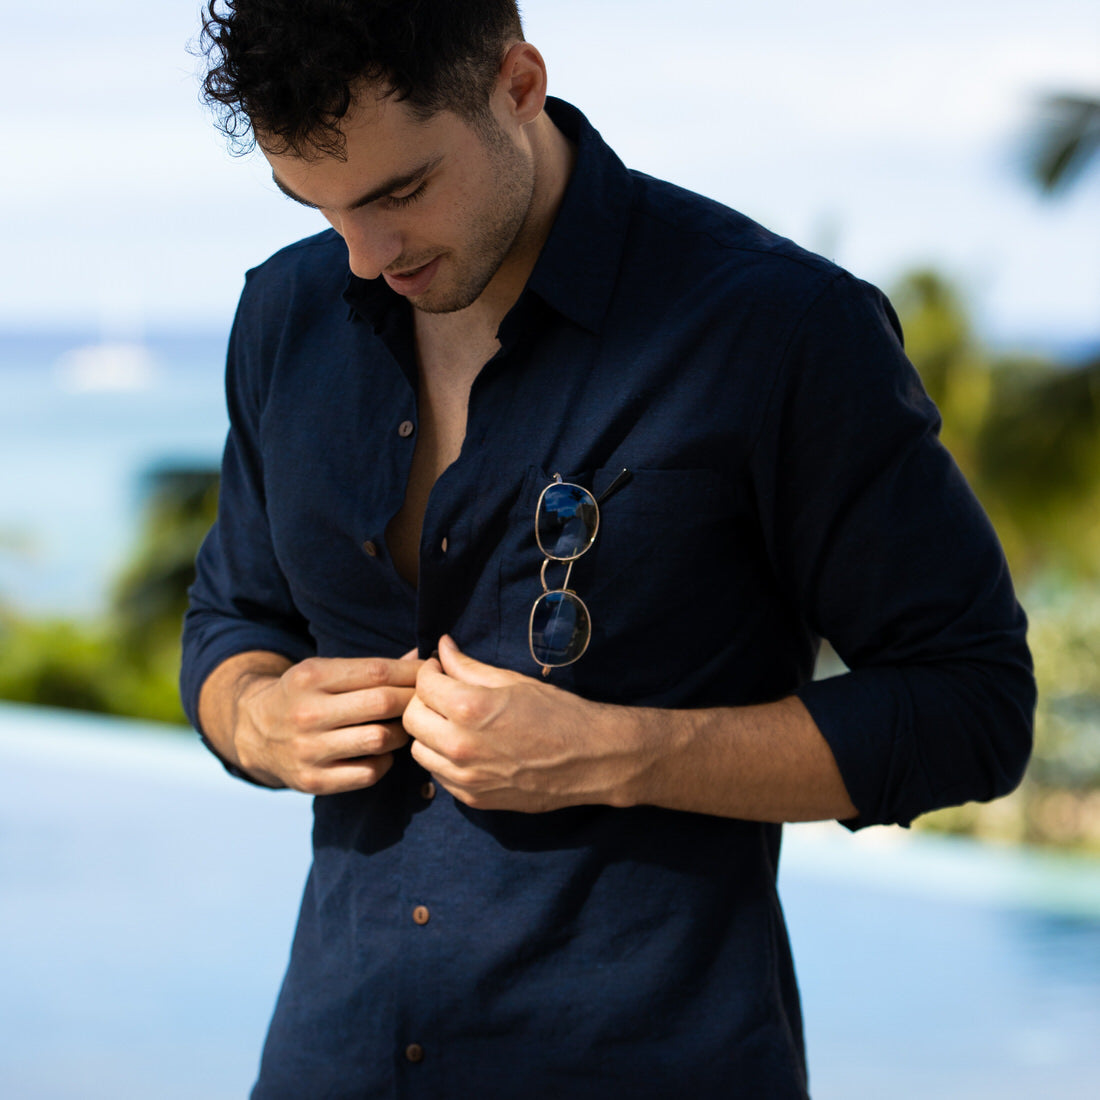 Men's navy hemp shirt - how to look expensive on a budget